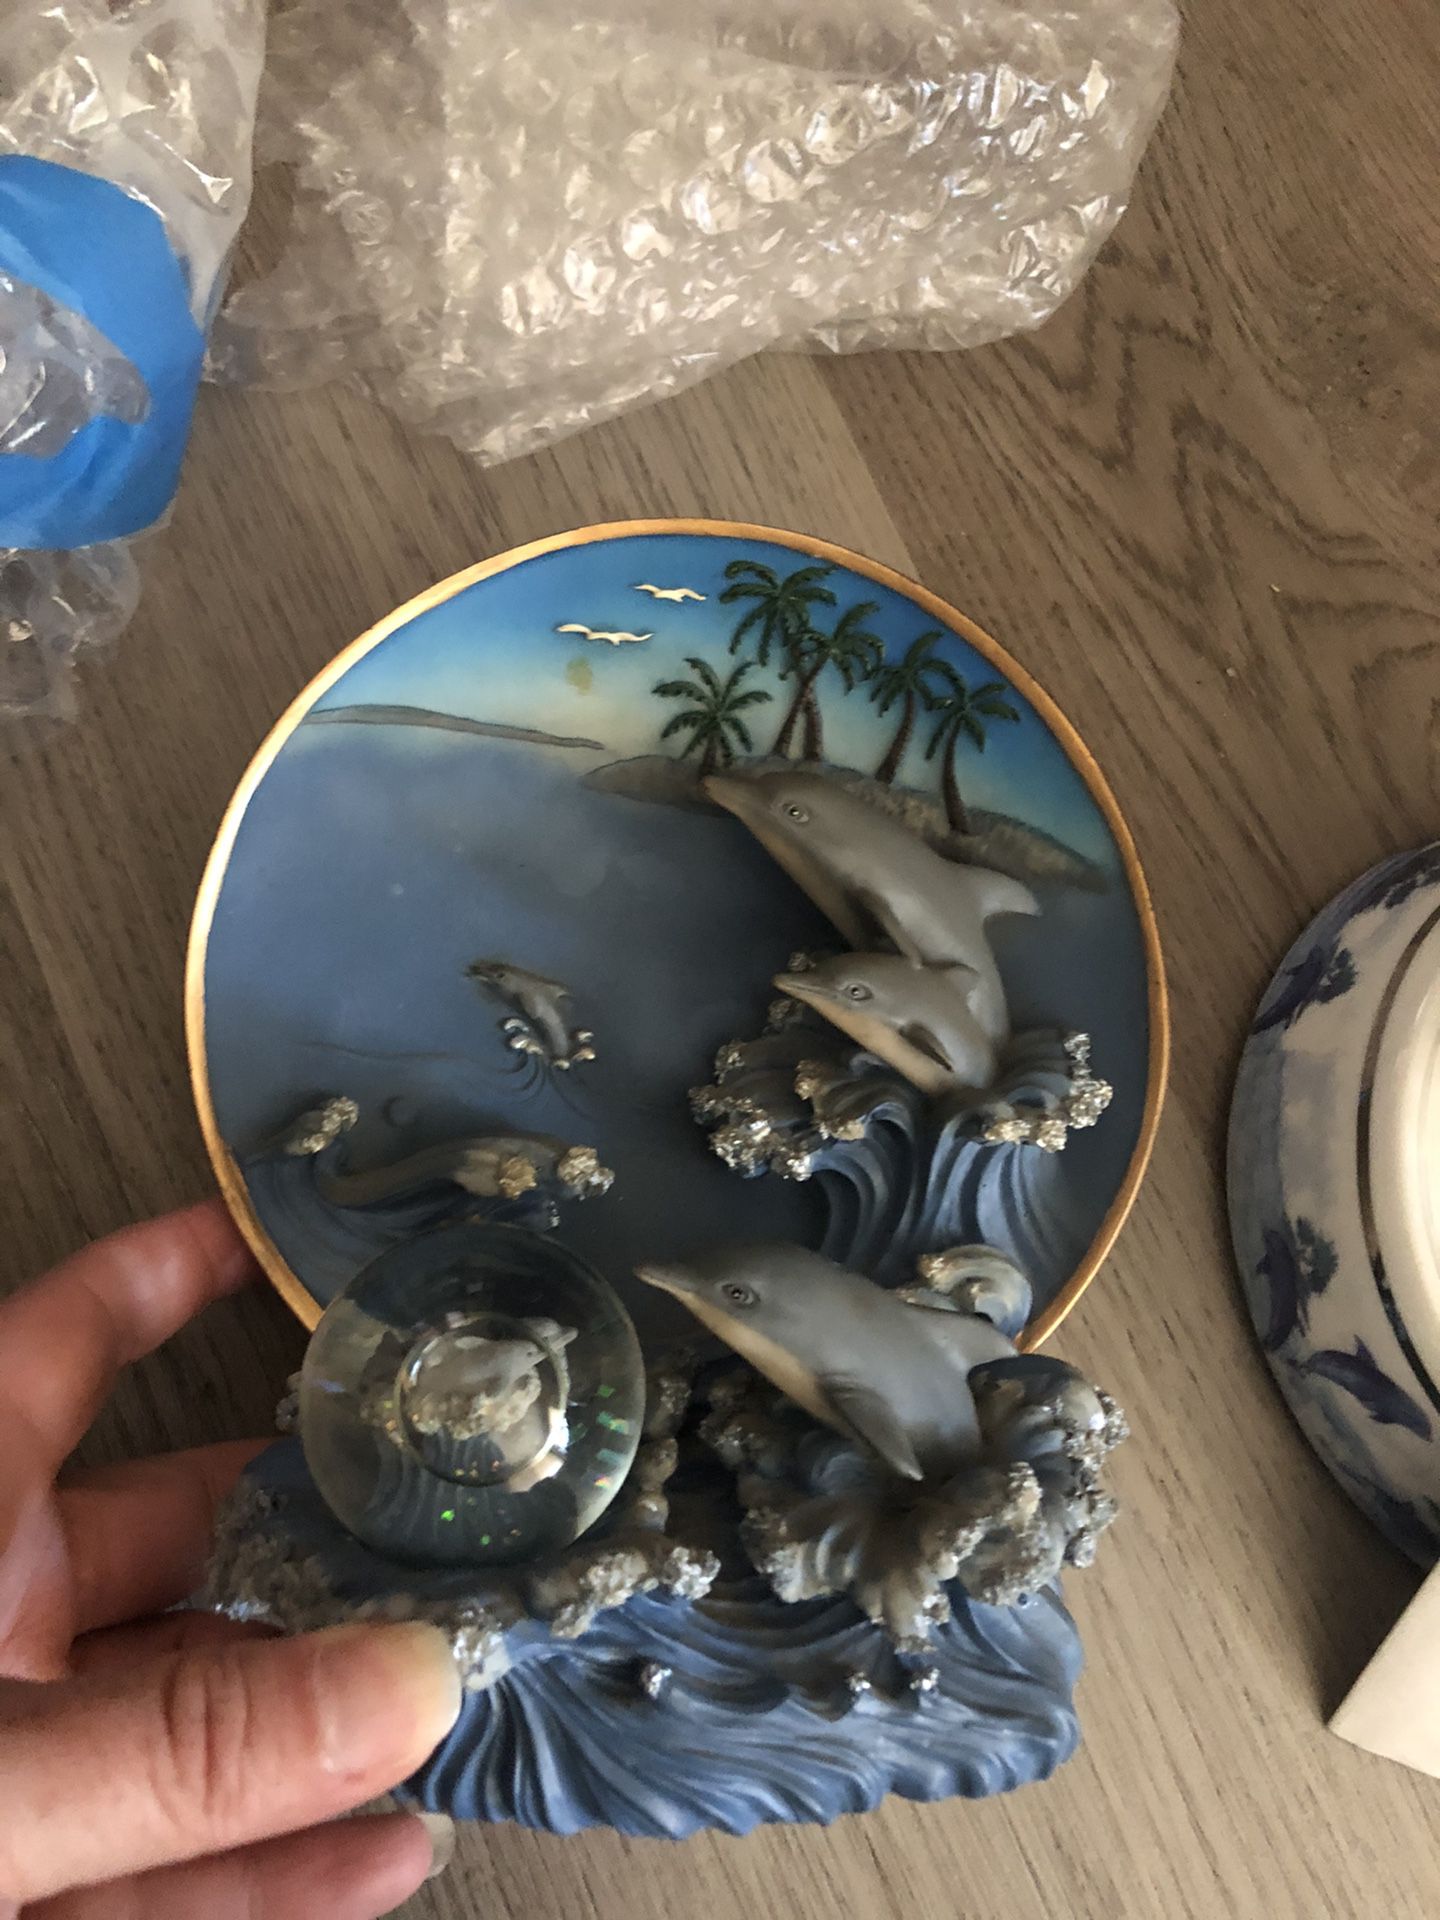 Dolphin collection - trinket boxes, plates, statues & more